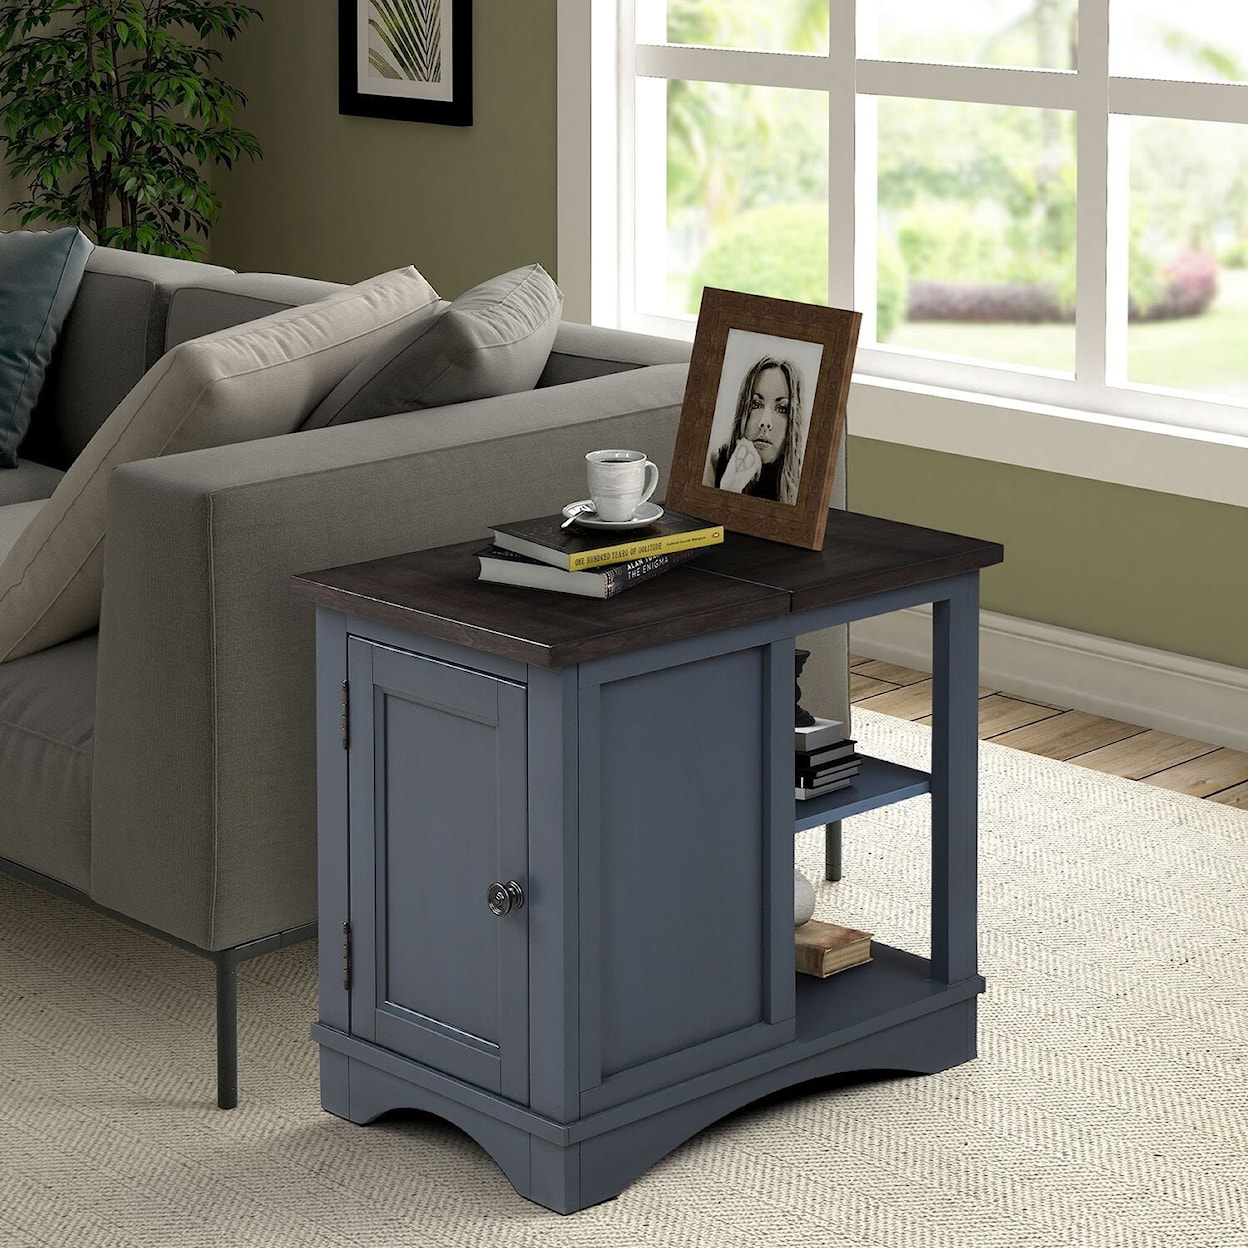 Parker House Americana Modern Chairside Table